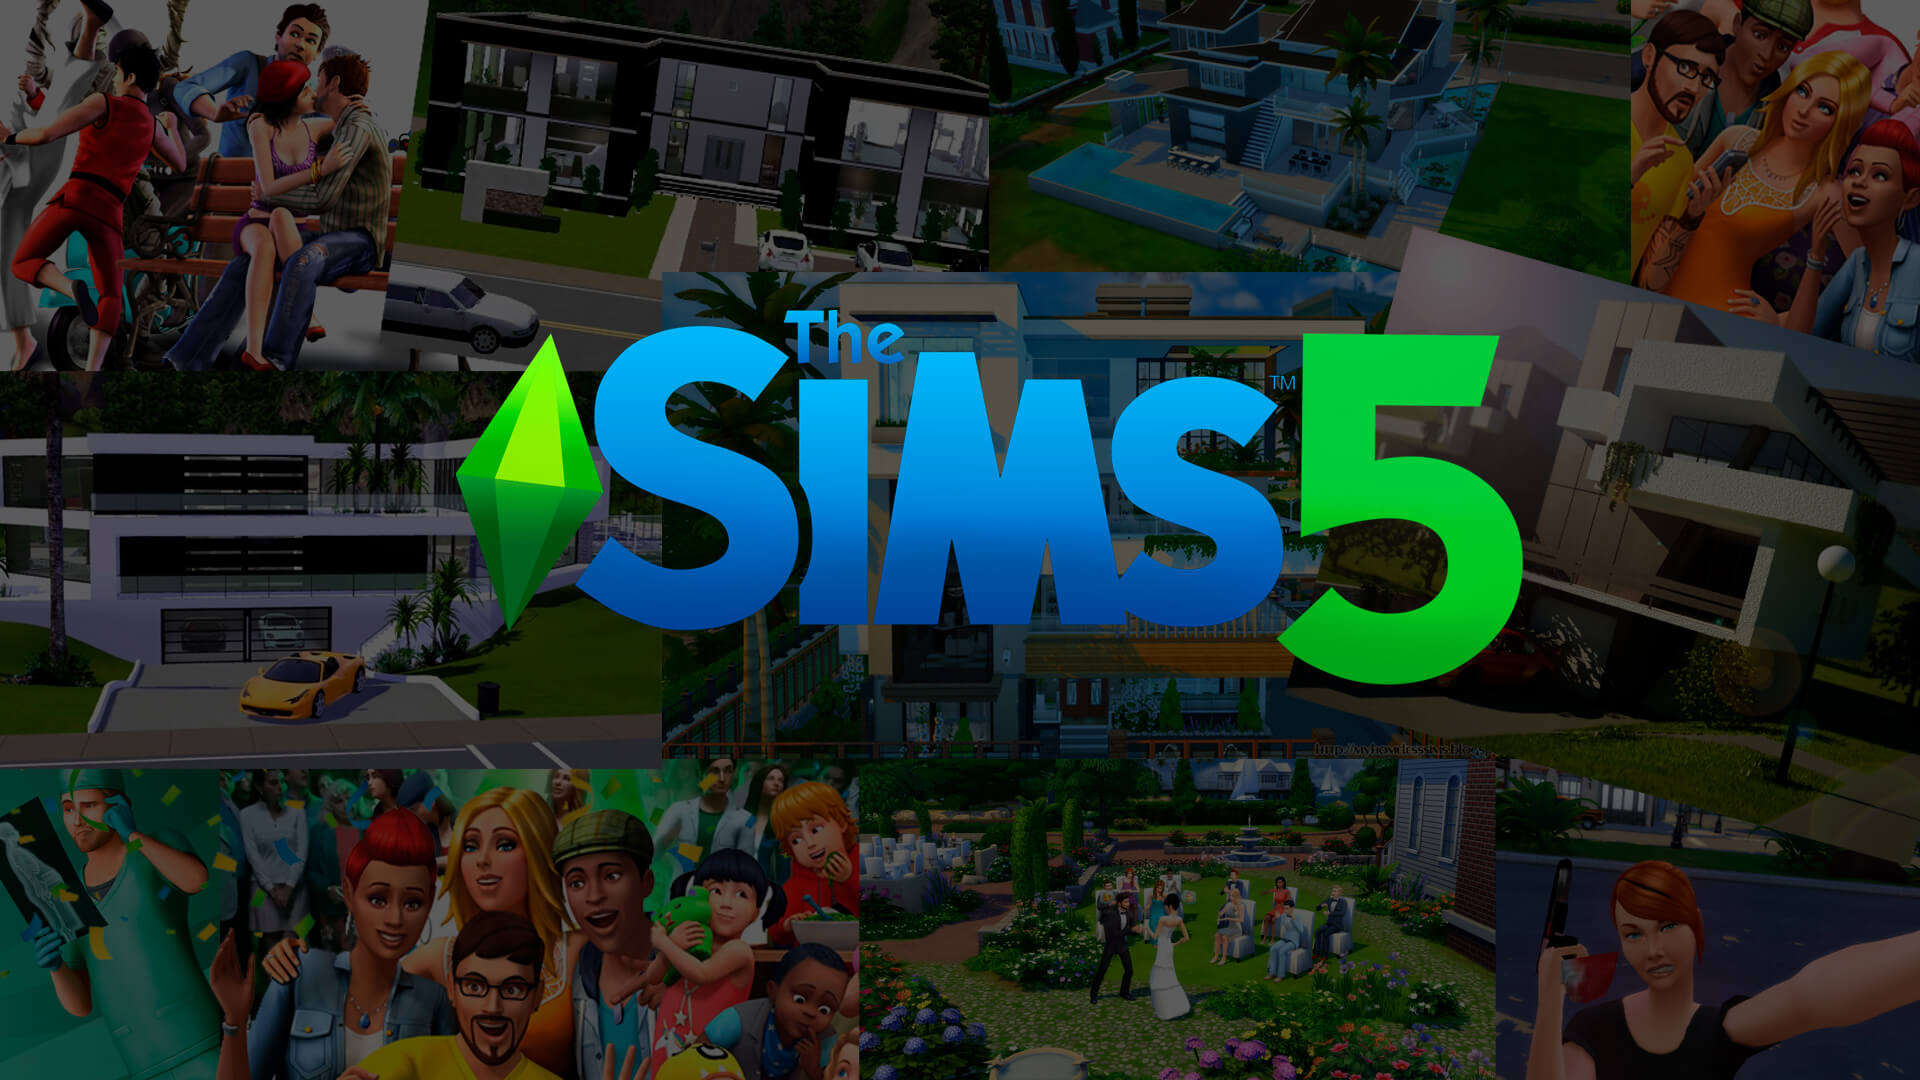 The Sims 5 2020 Release Date Delayed As More Sims 4 Expansion